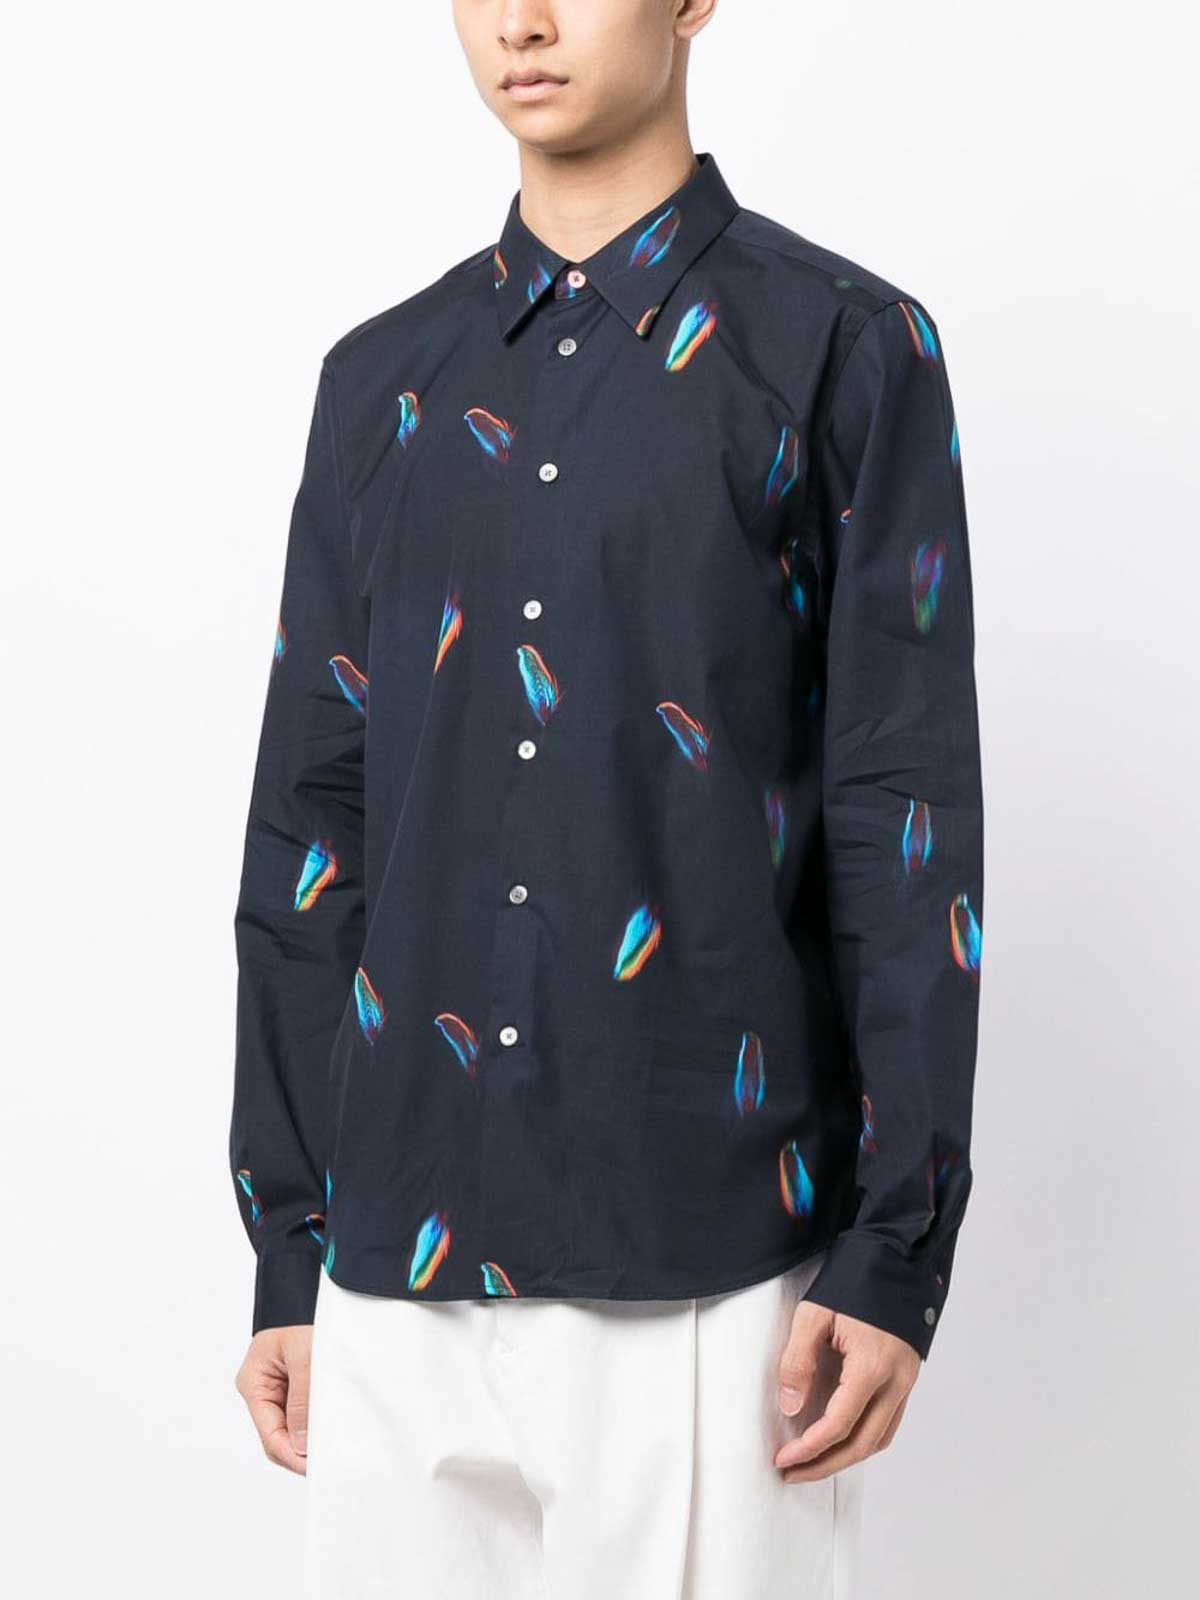 Shirts Paul Smith - Navy blue feather shirt - M2R610PL2191949